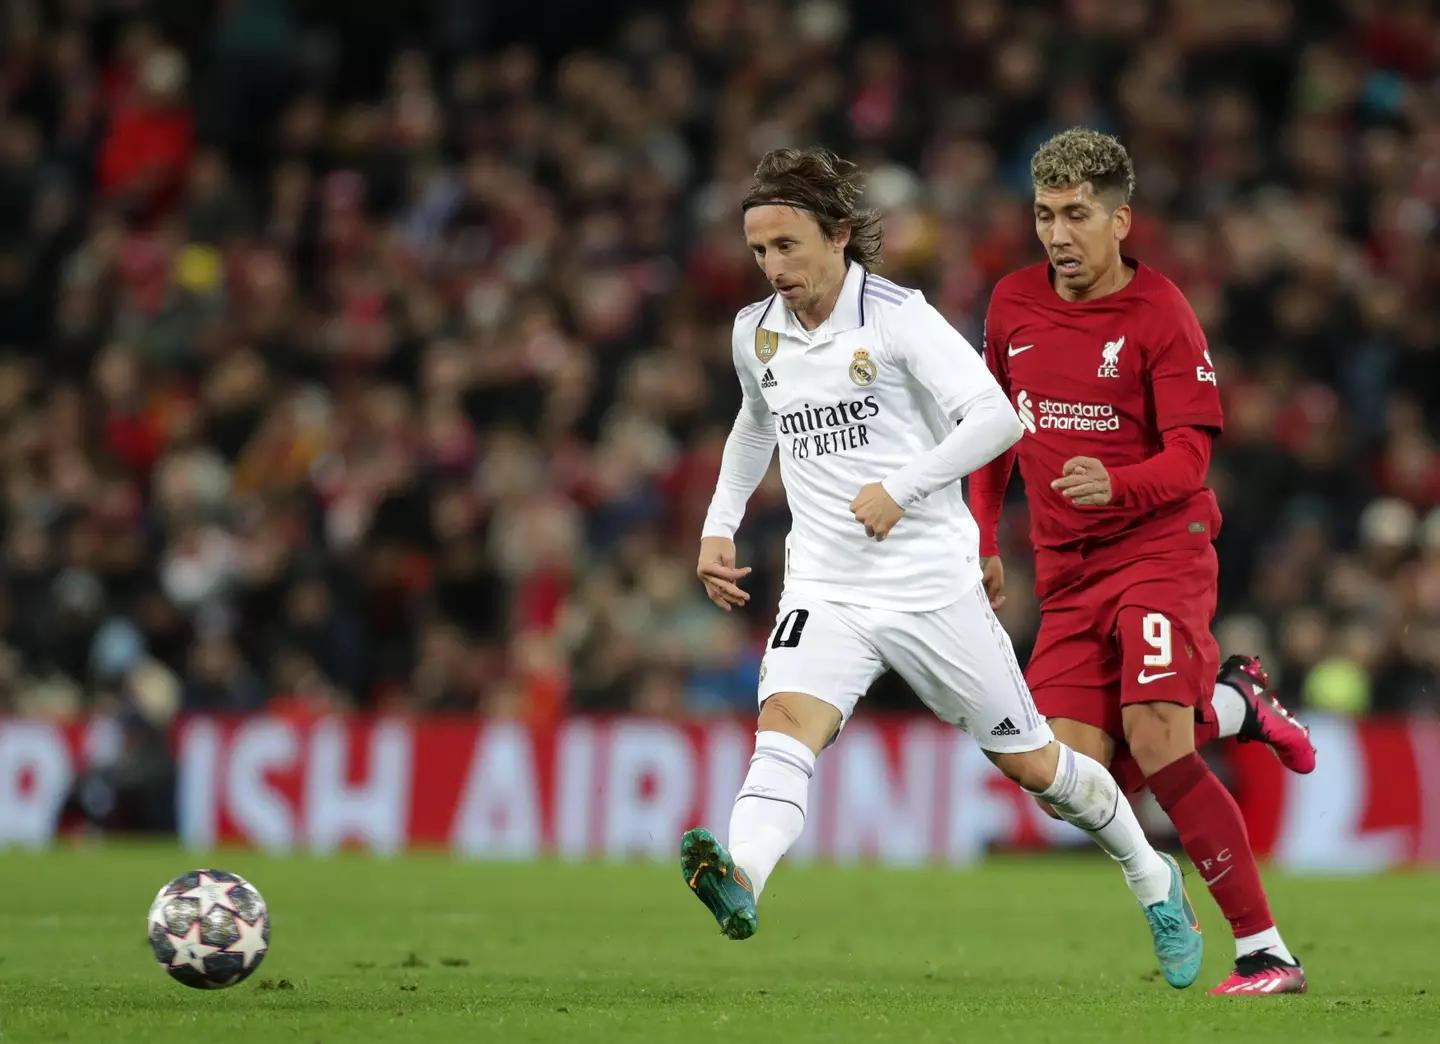 Modric under pressure from Roberto Firmino during the game. (Image